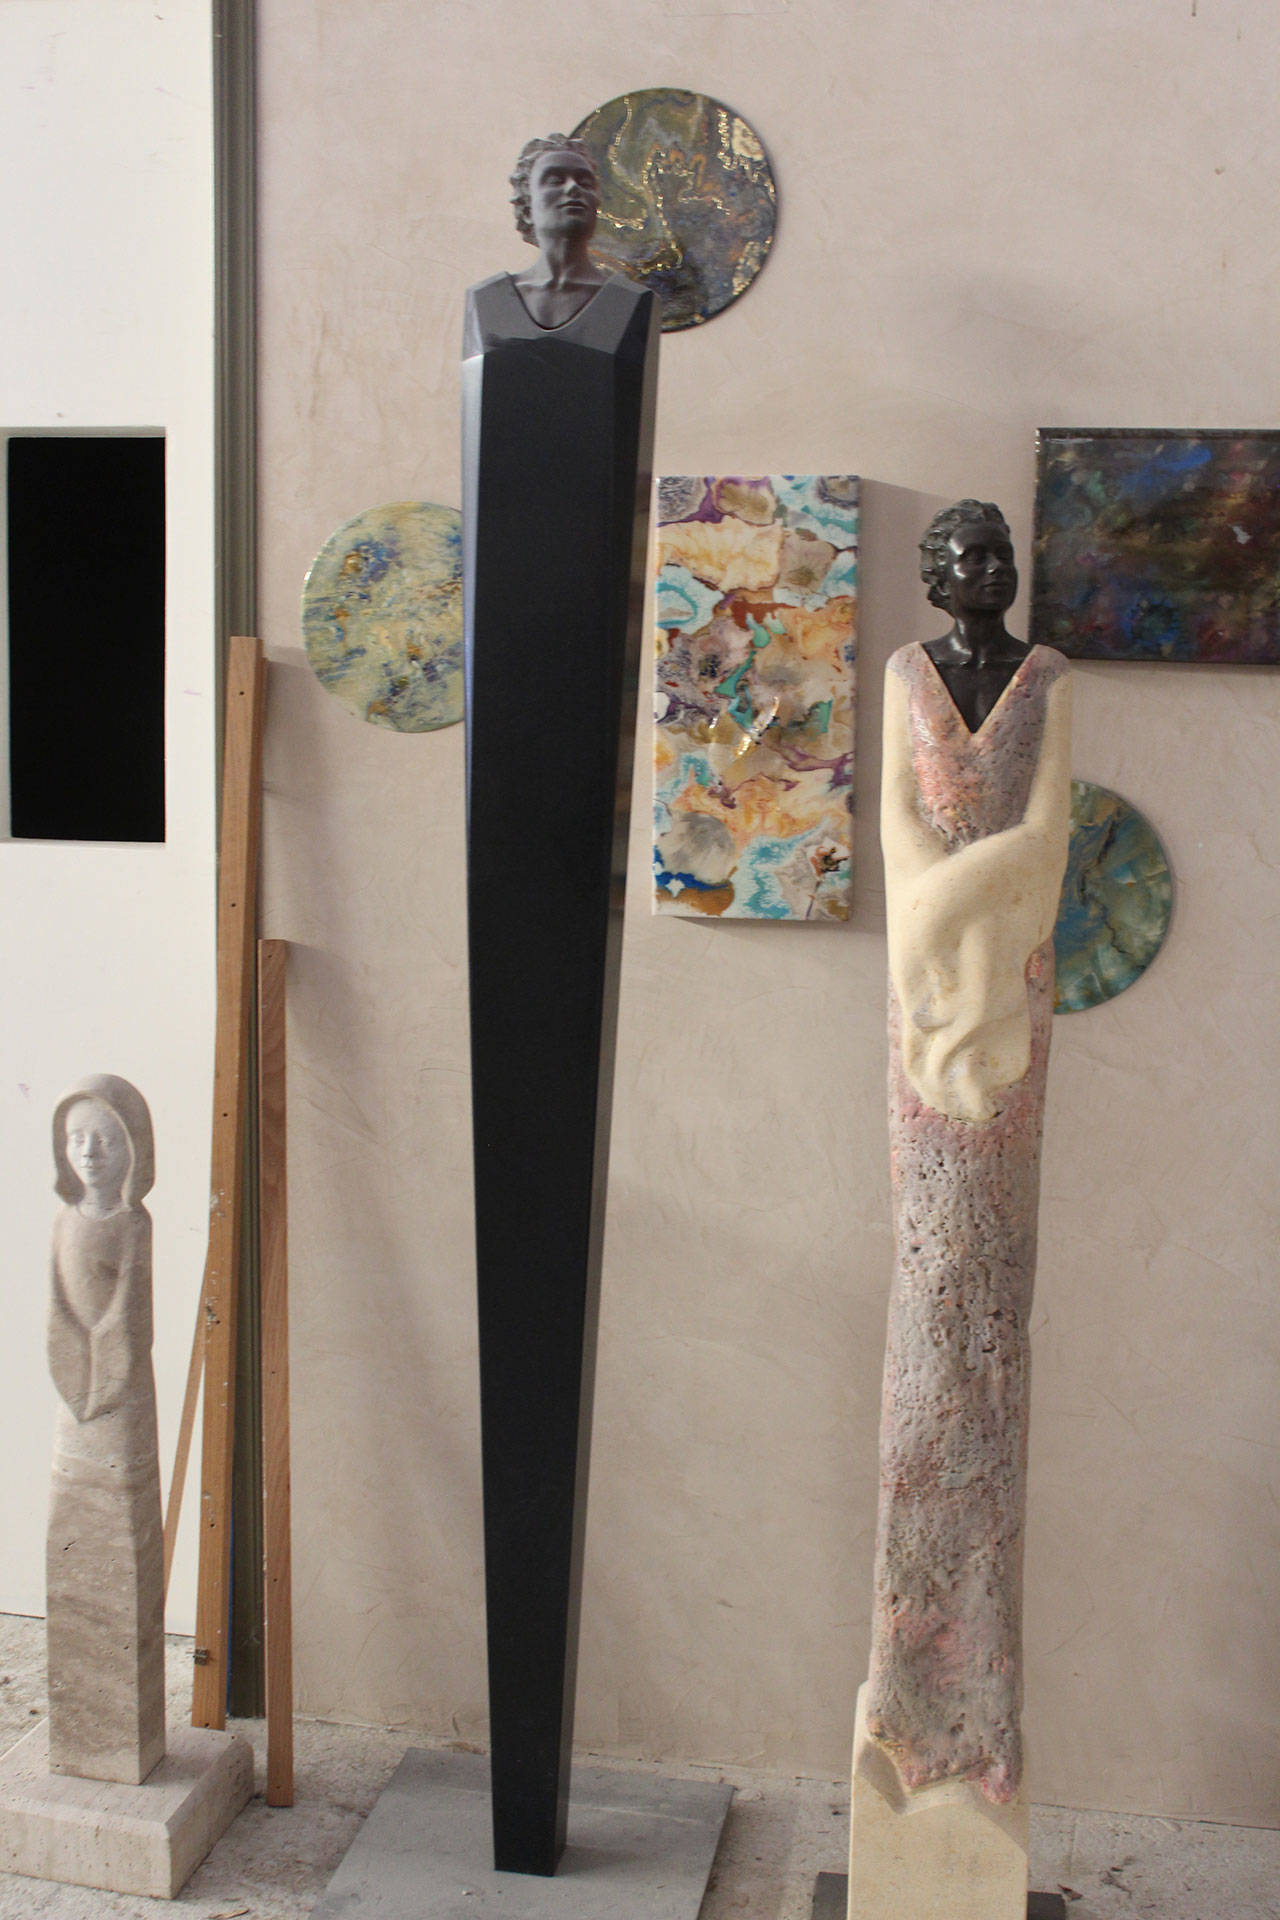 Some of the artwork on view at Freeland Art Studios that’s hosting an open house June 9.